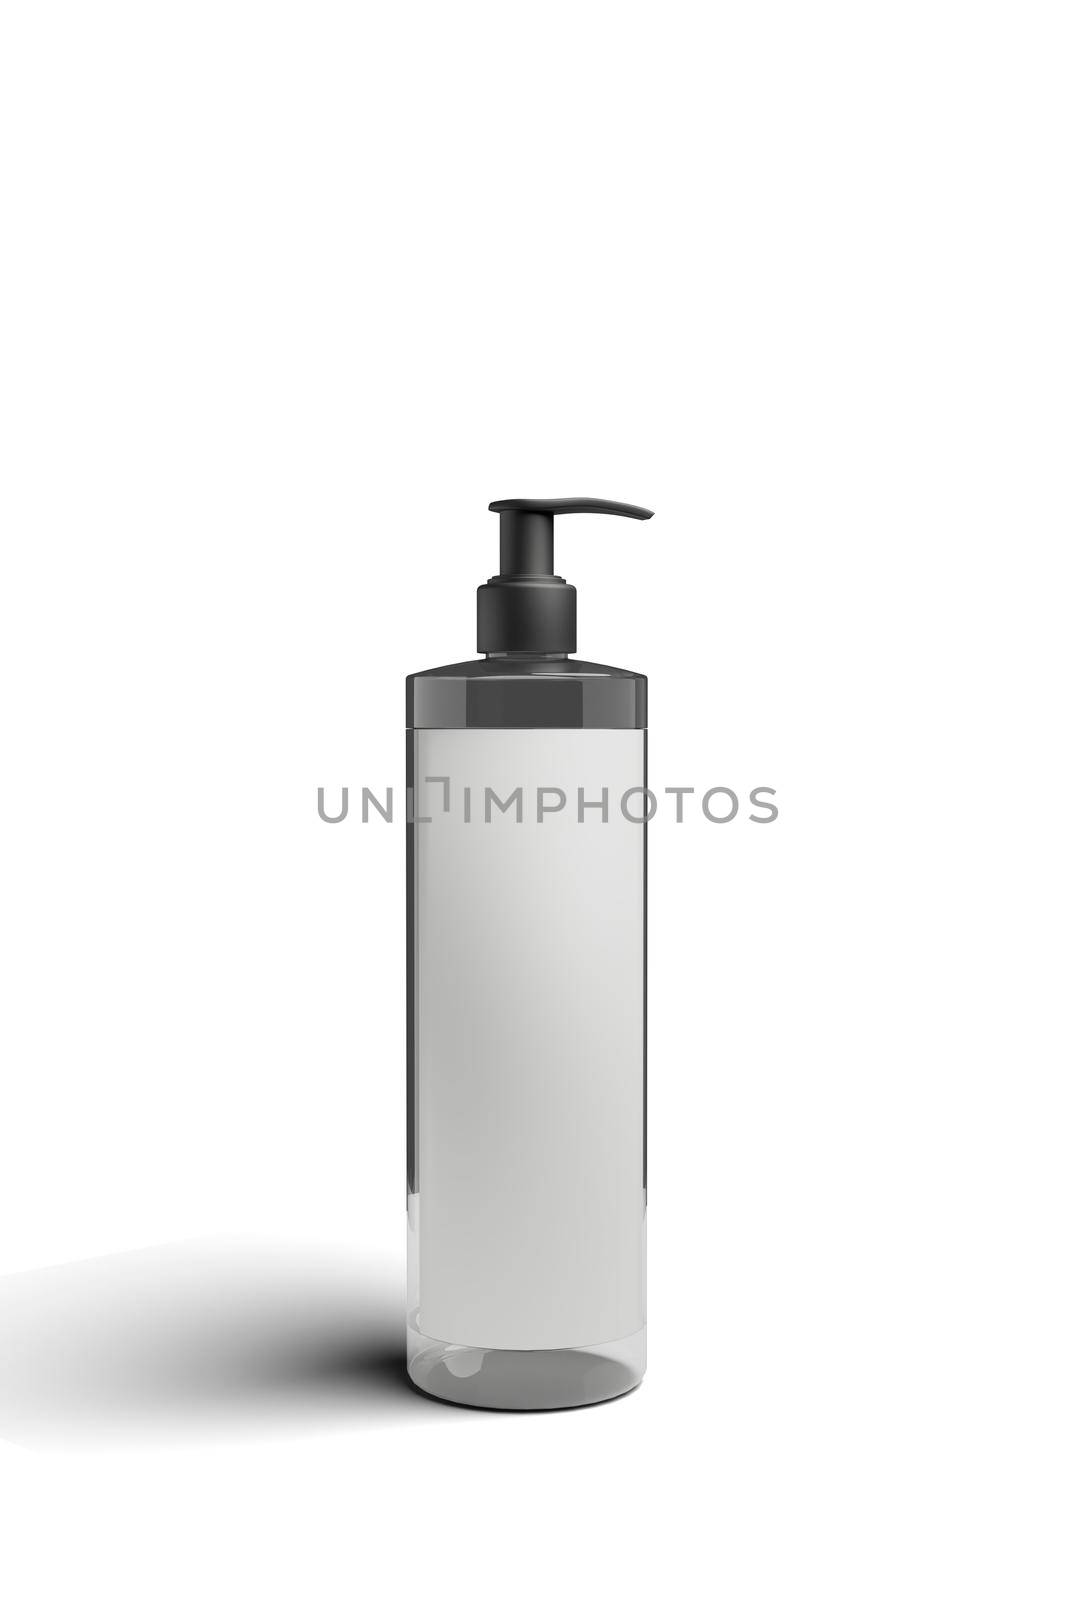 cosmetic bottle mockup with silver cap. realistic illustration. 3d rendering. by jbruiz78